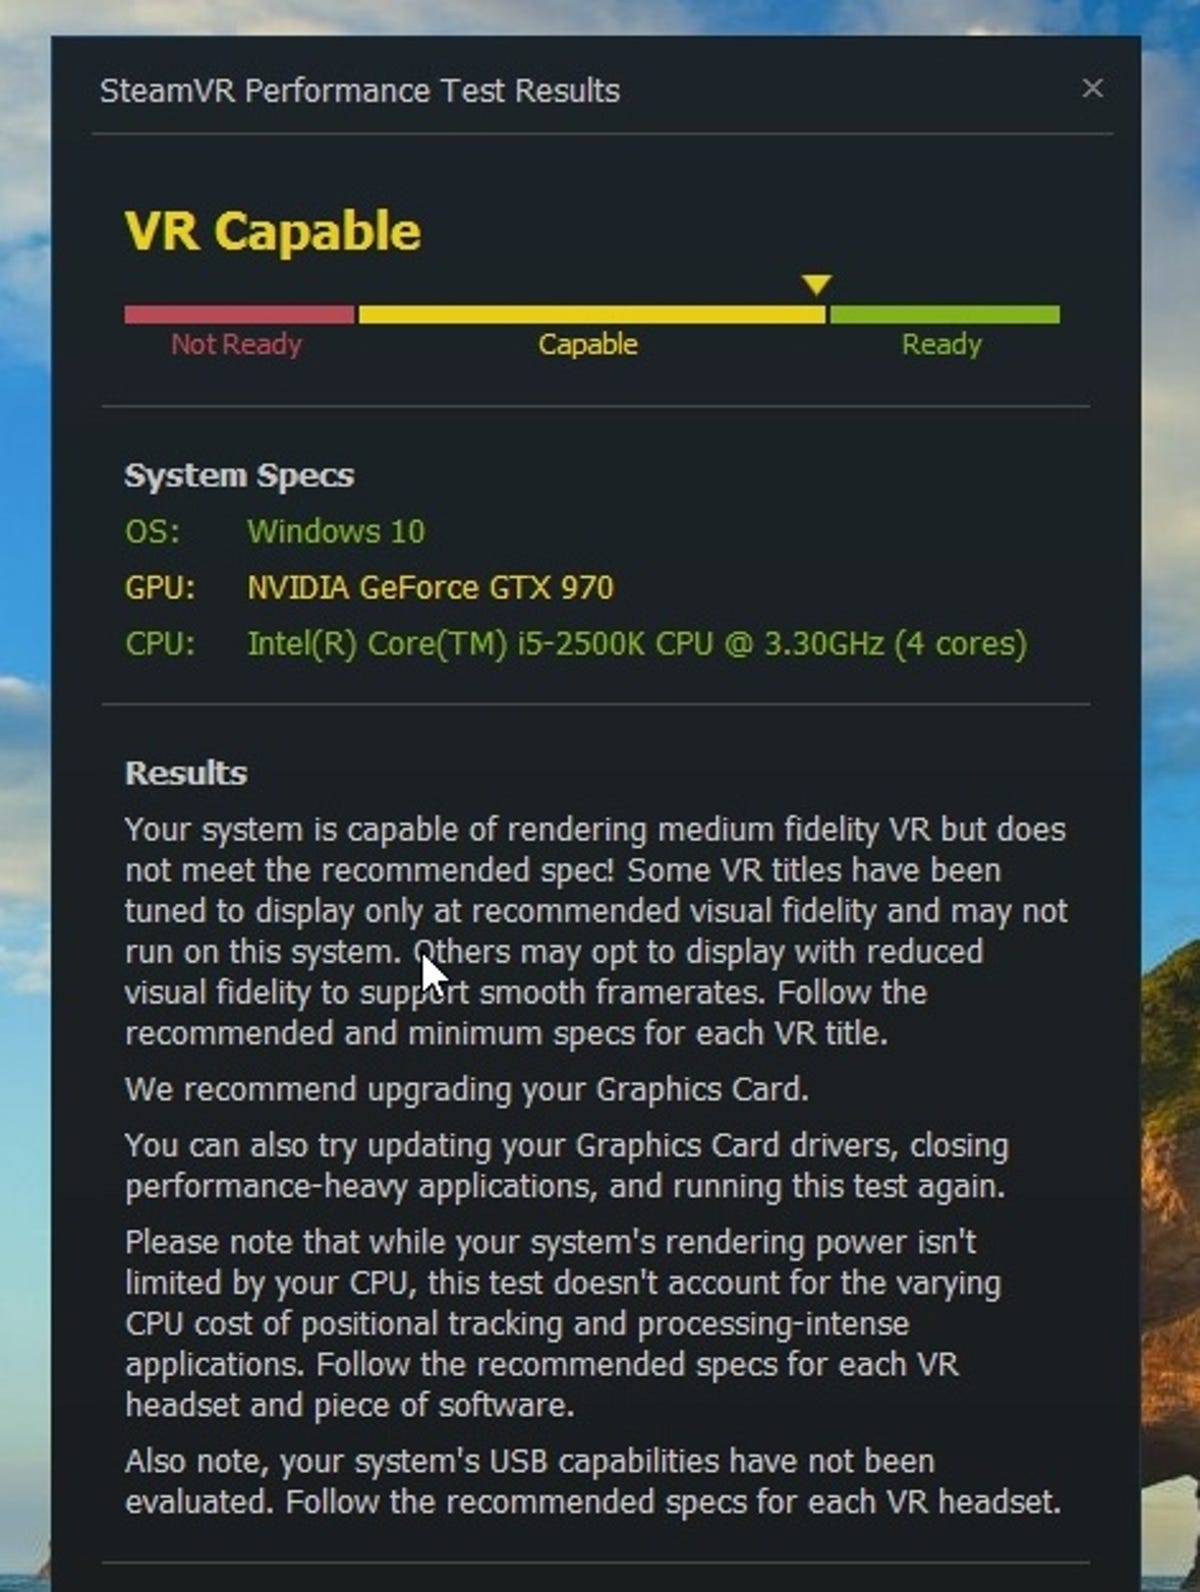 Anklage forbrydelse Thorny Is your PC ready for VR? This test says mine's not good enough - CNET